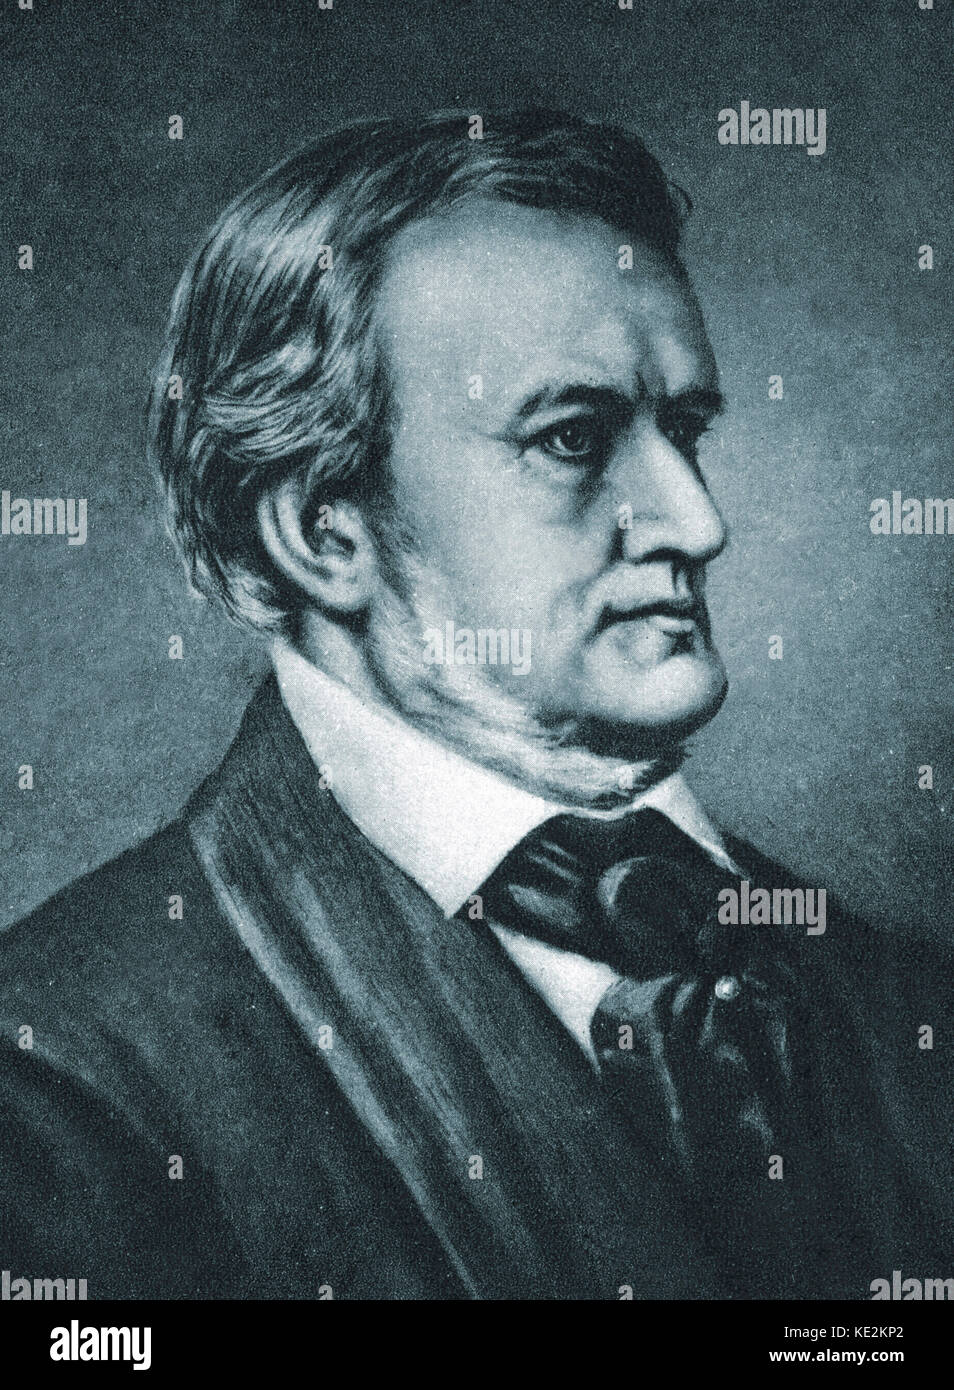 Richard Wagner portrait. German composer & author, 22 May 1813 - 13 February 1883. Stock Photo